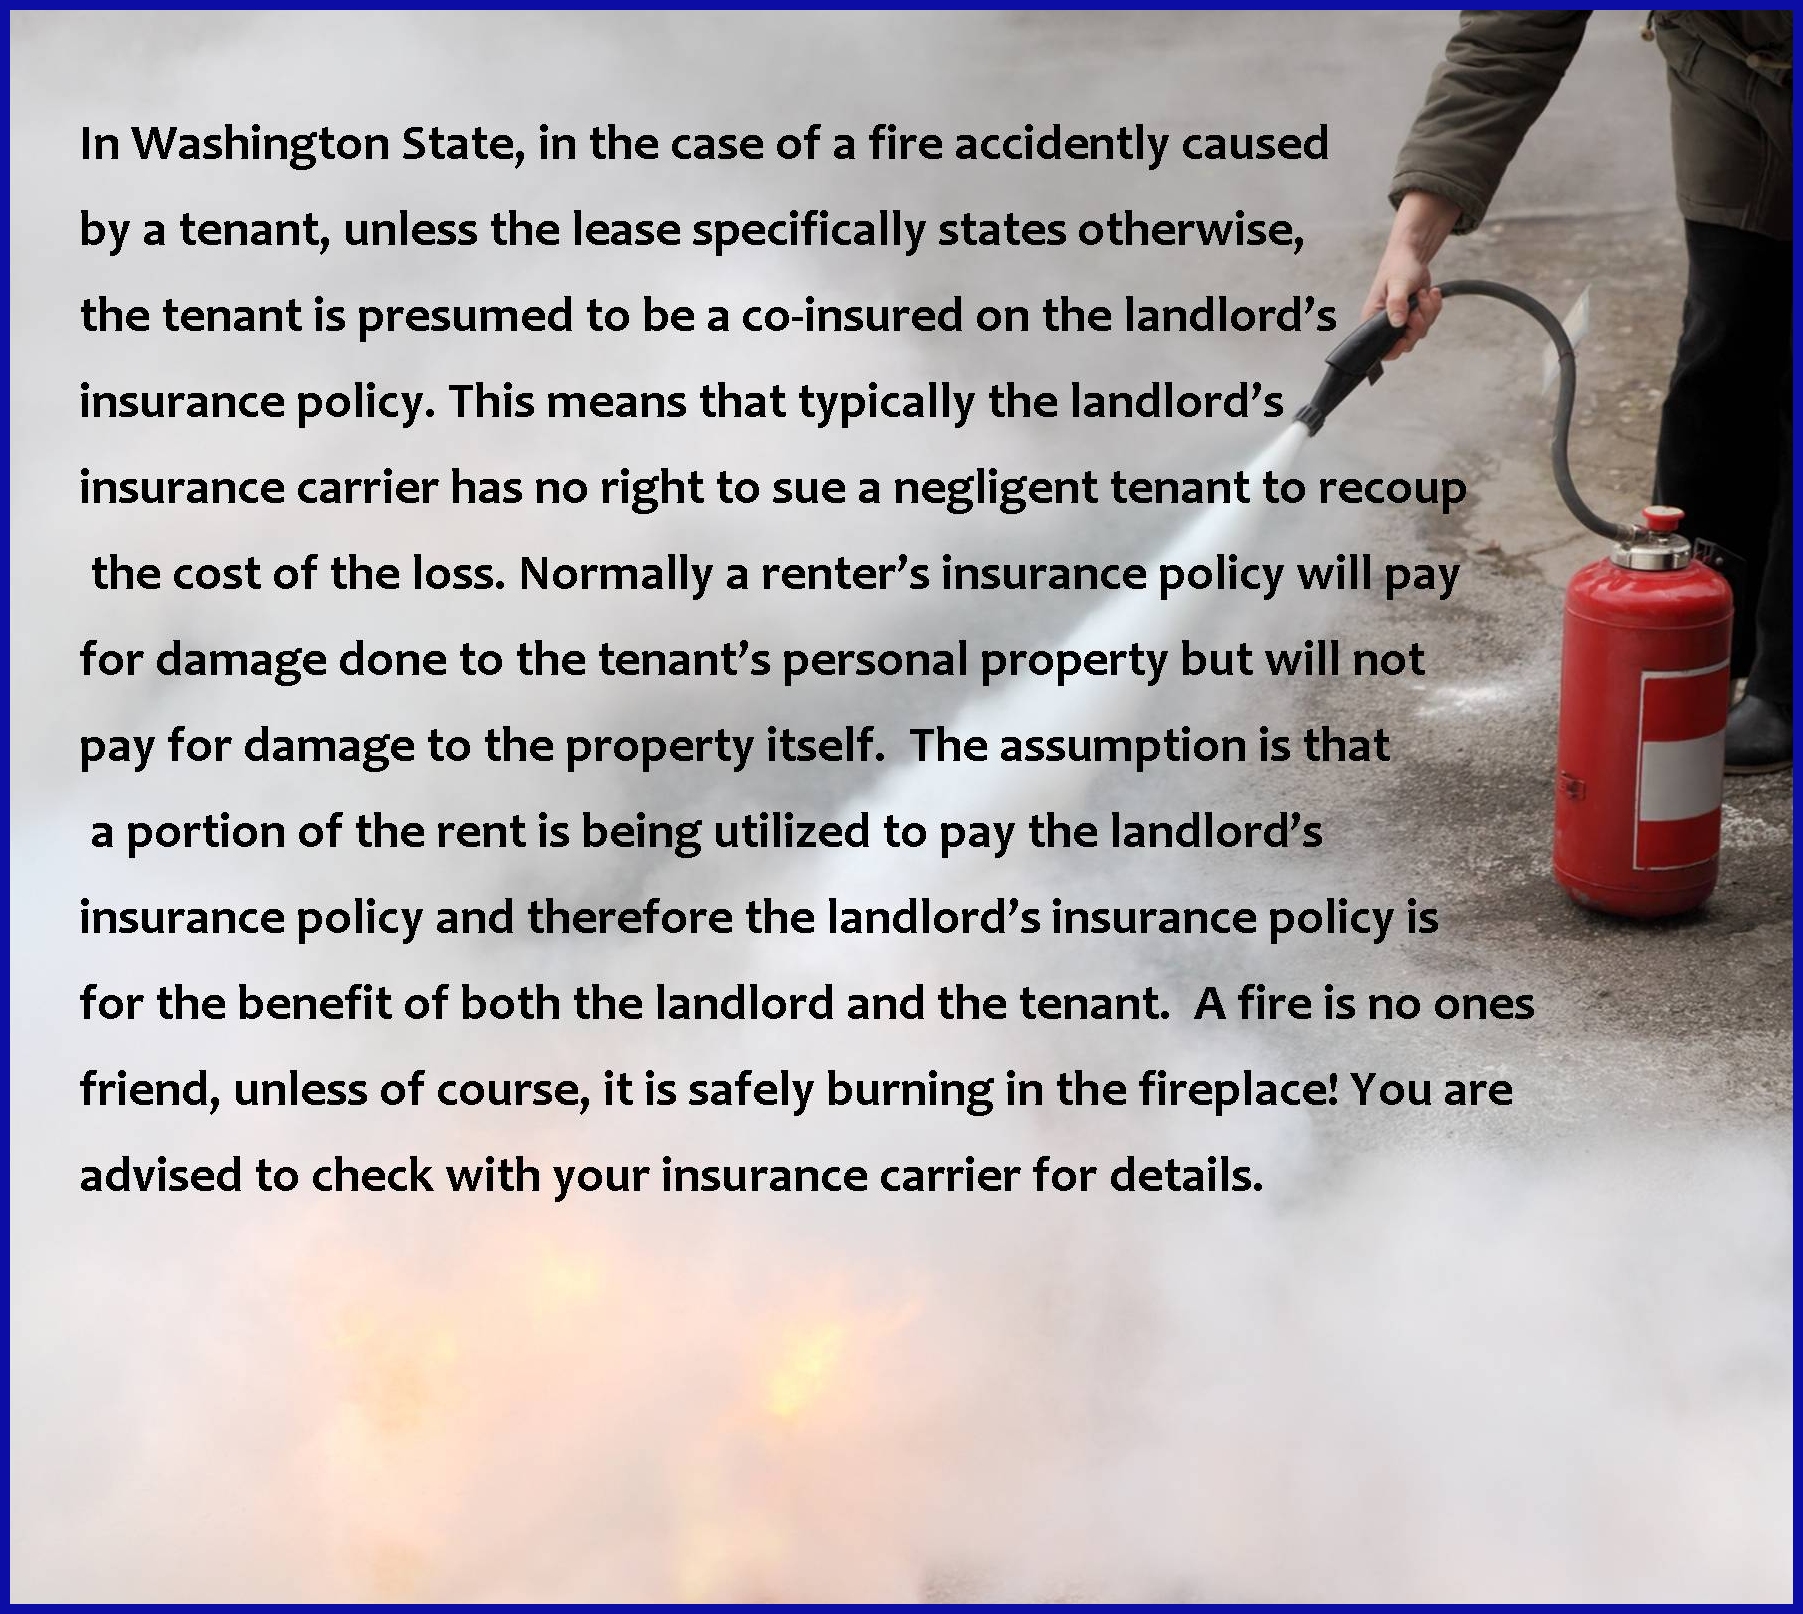 FIRE INSURANCE & THE TENANT